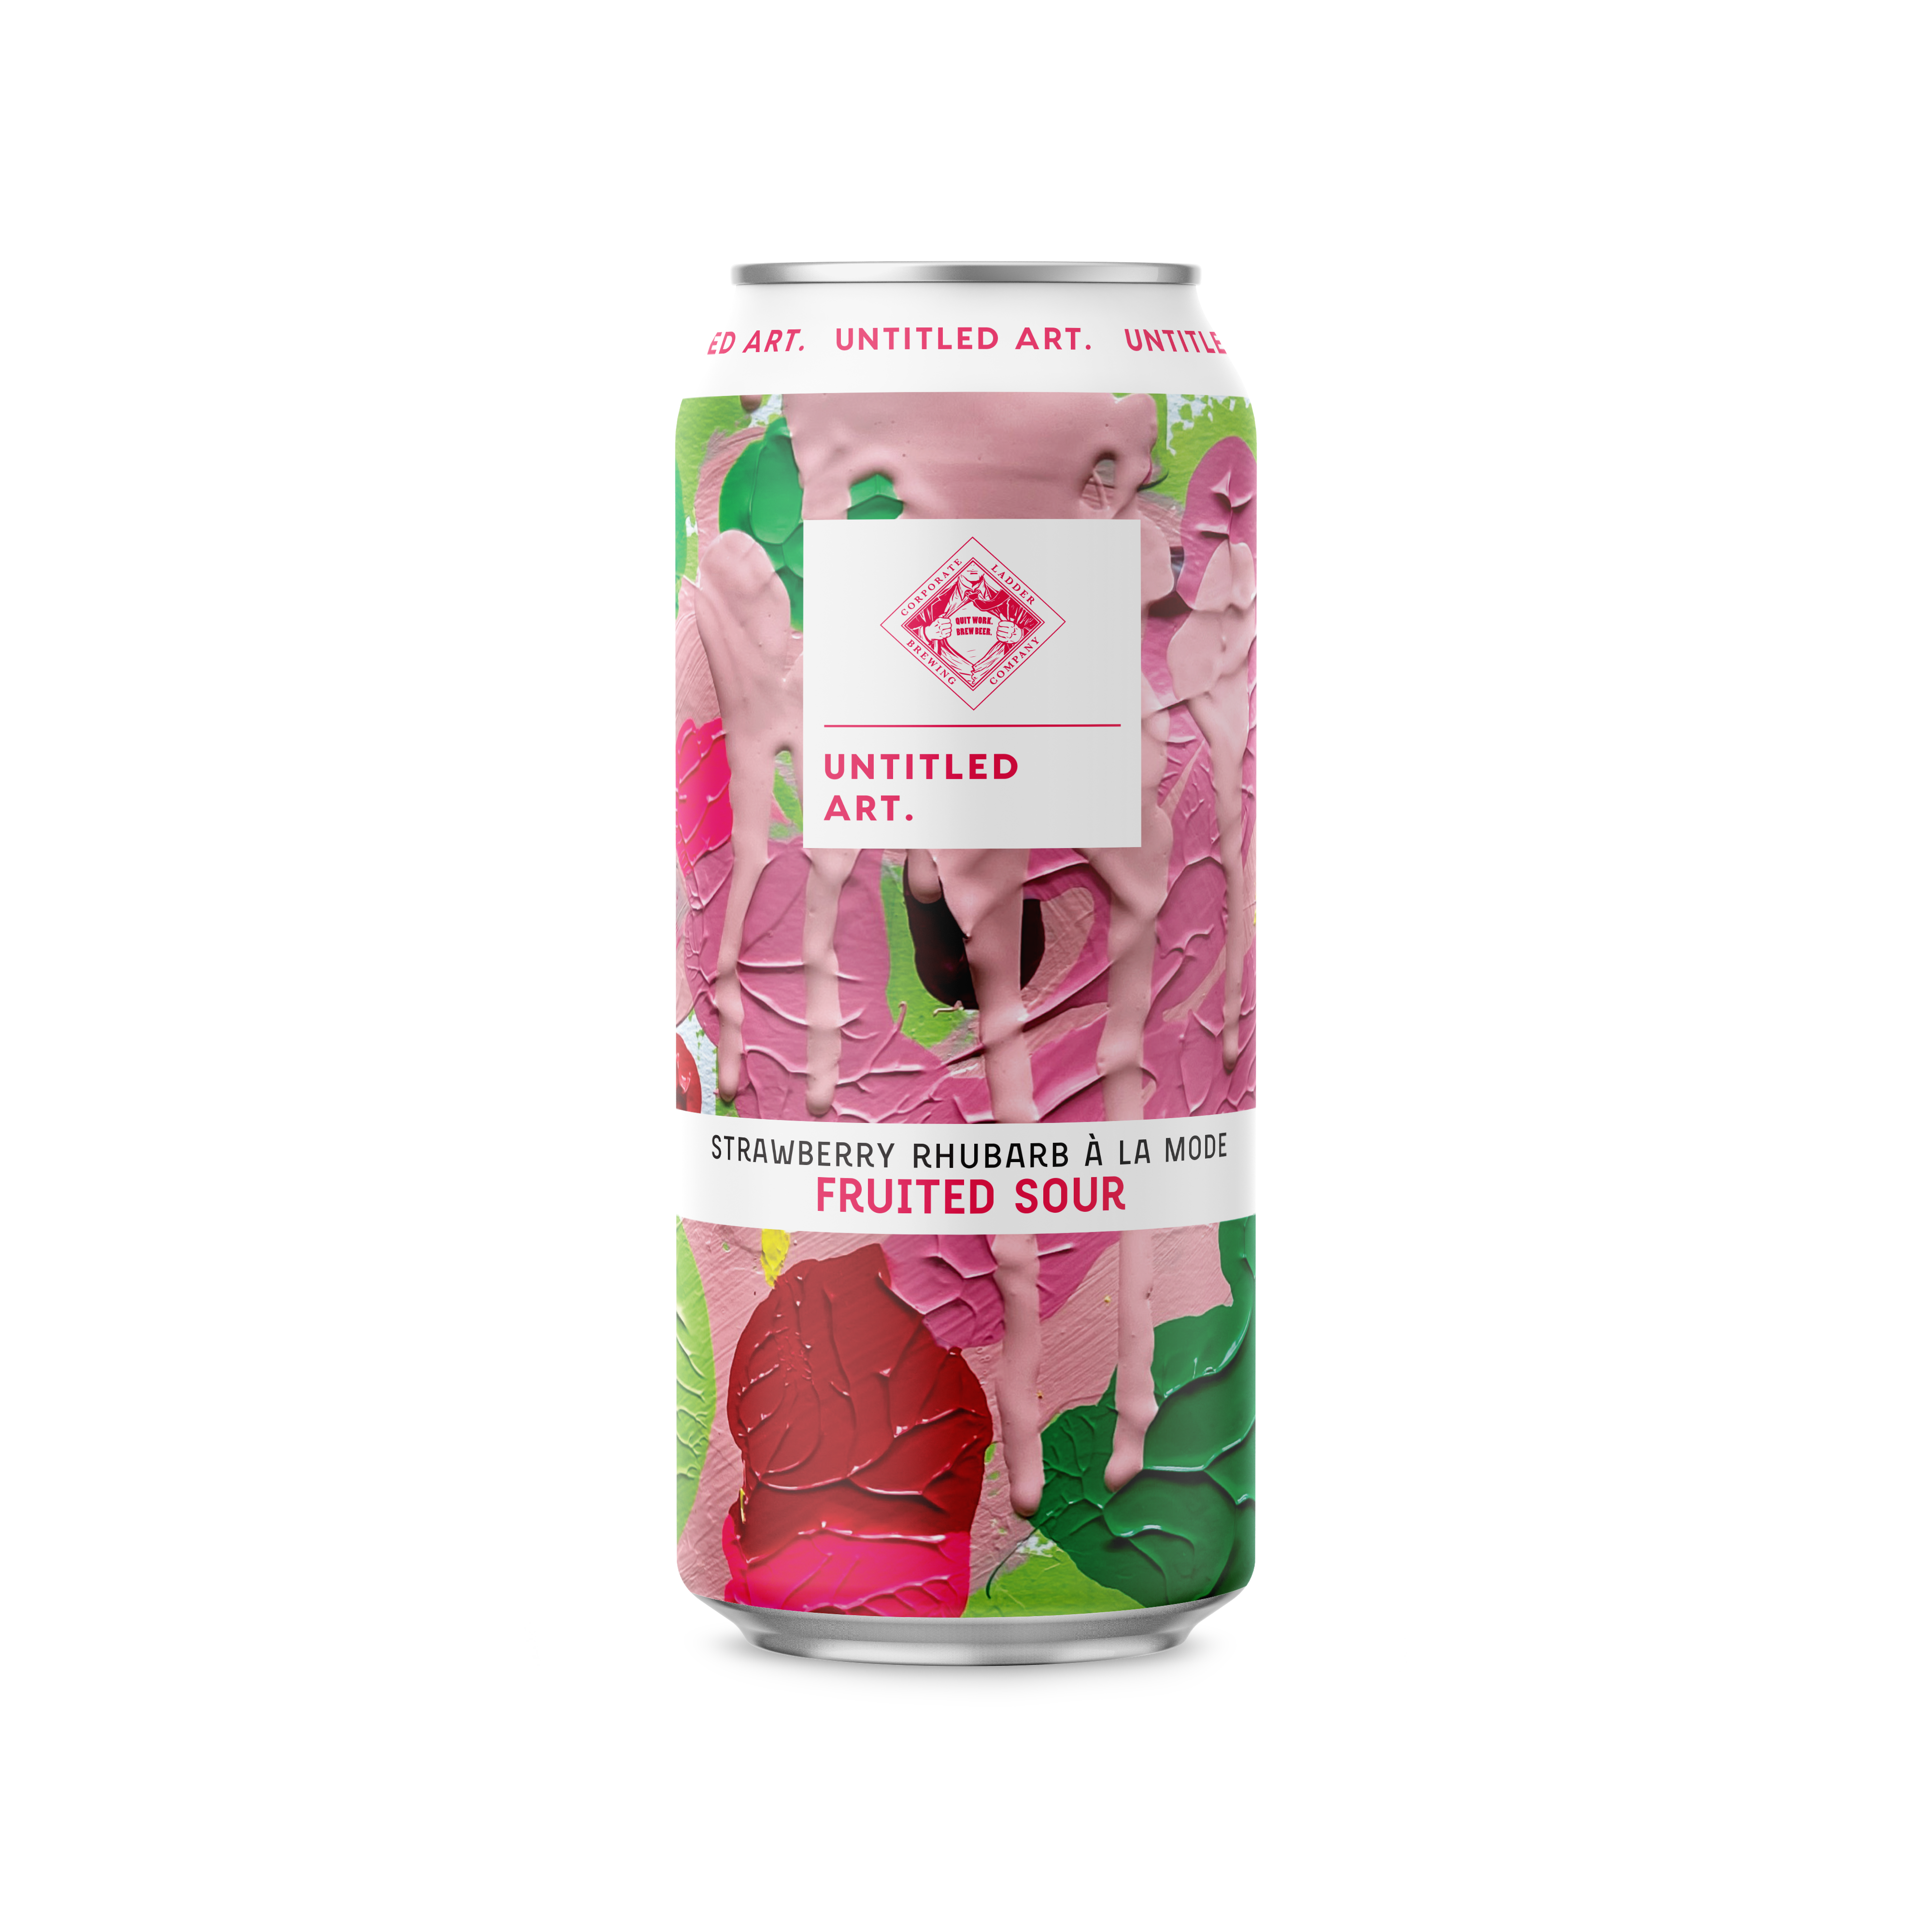 A can of ice cream with a pink background.